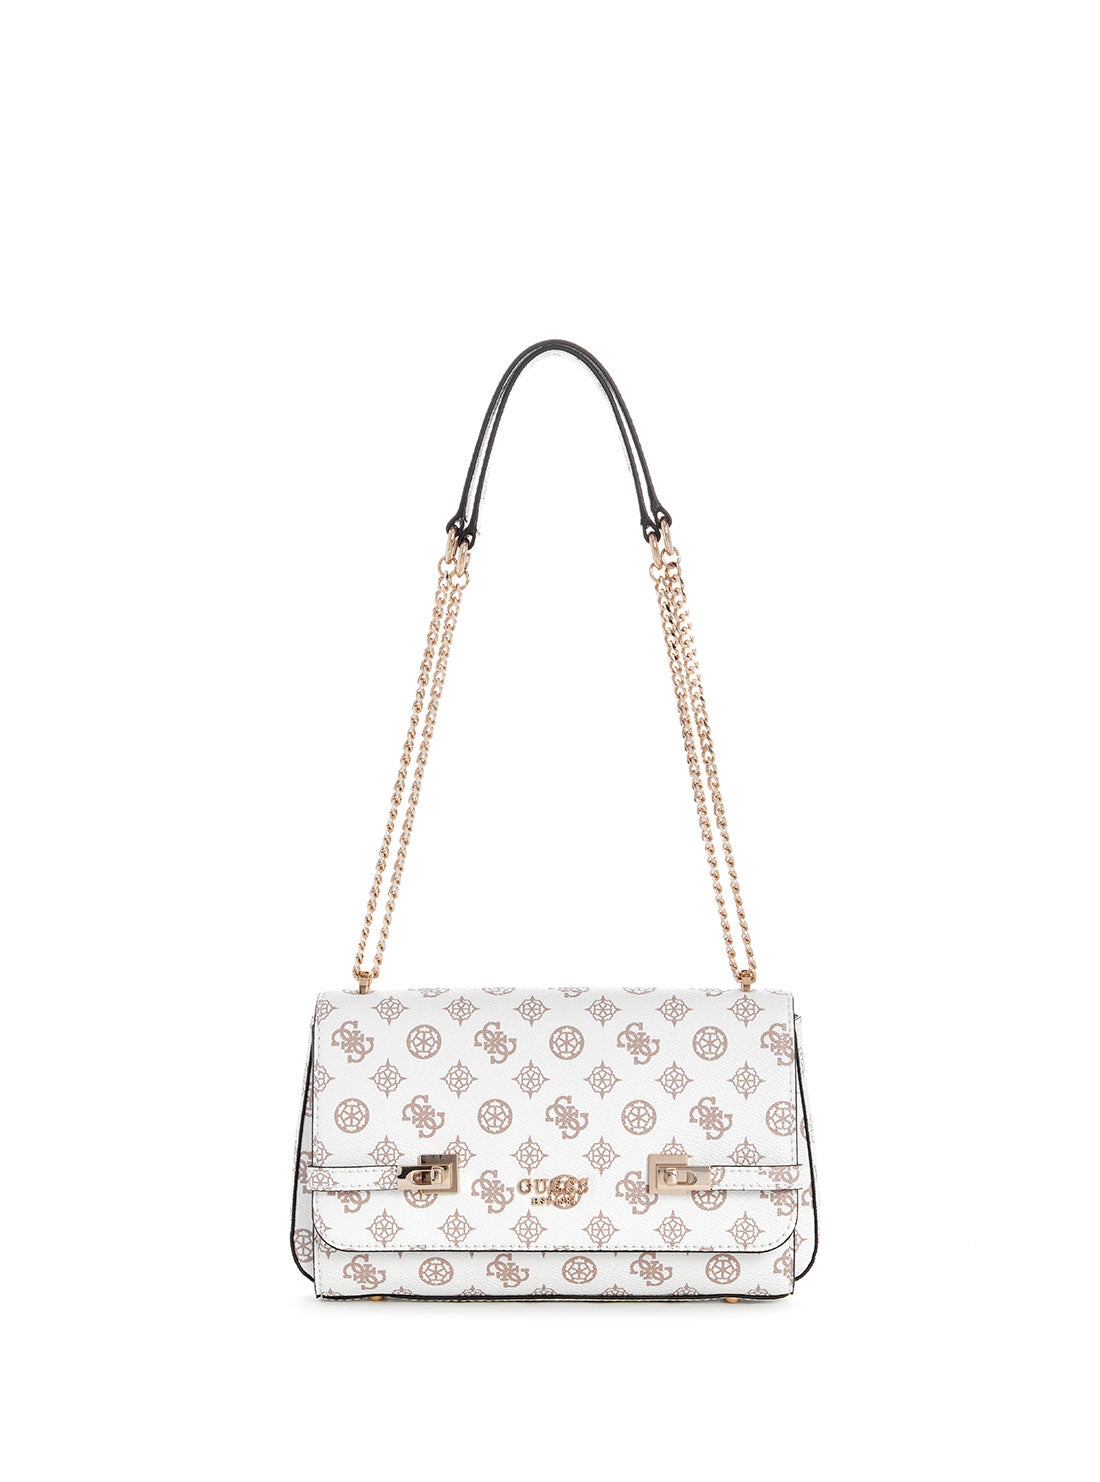 GUESS White Logo Loralee Crossbody Bag front view